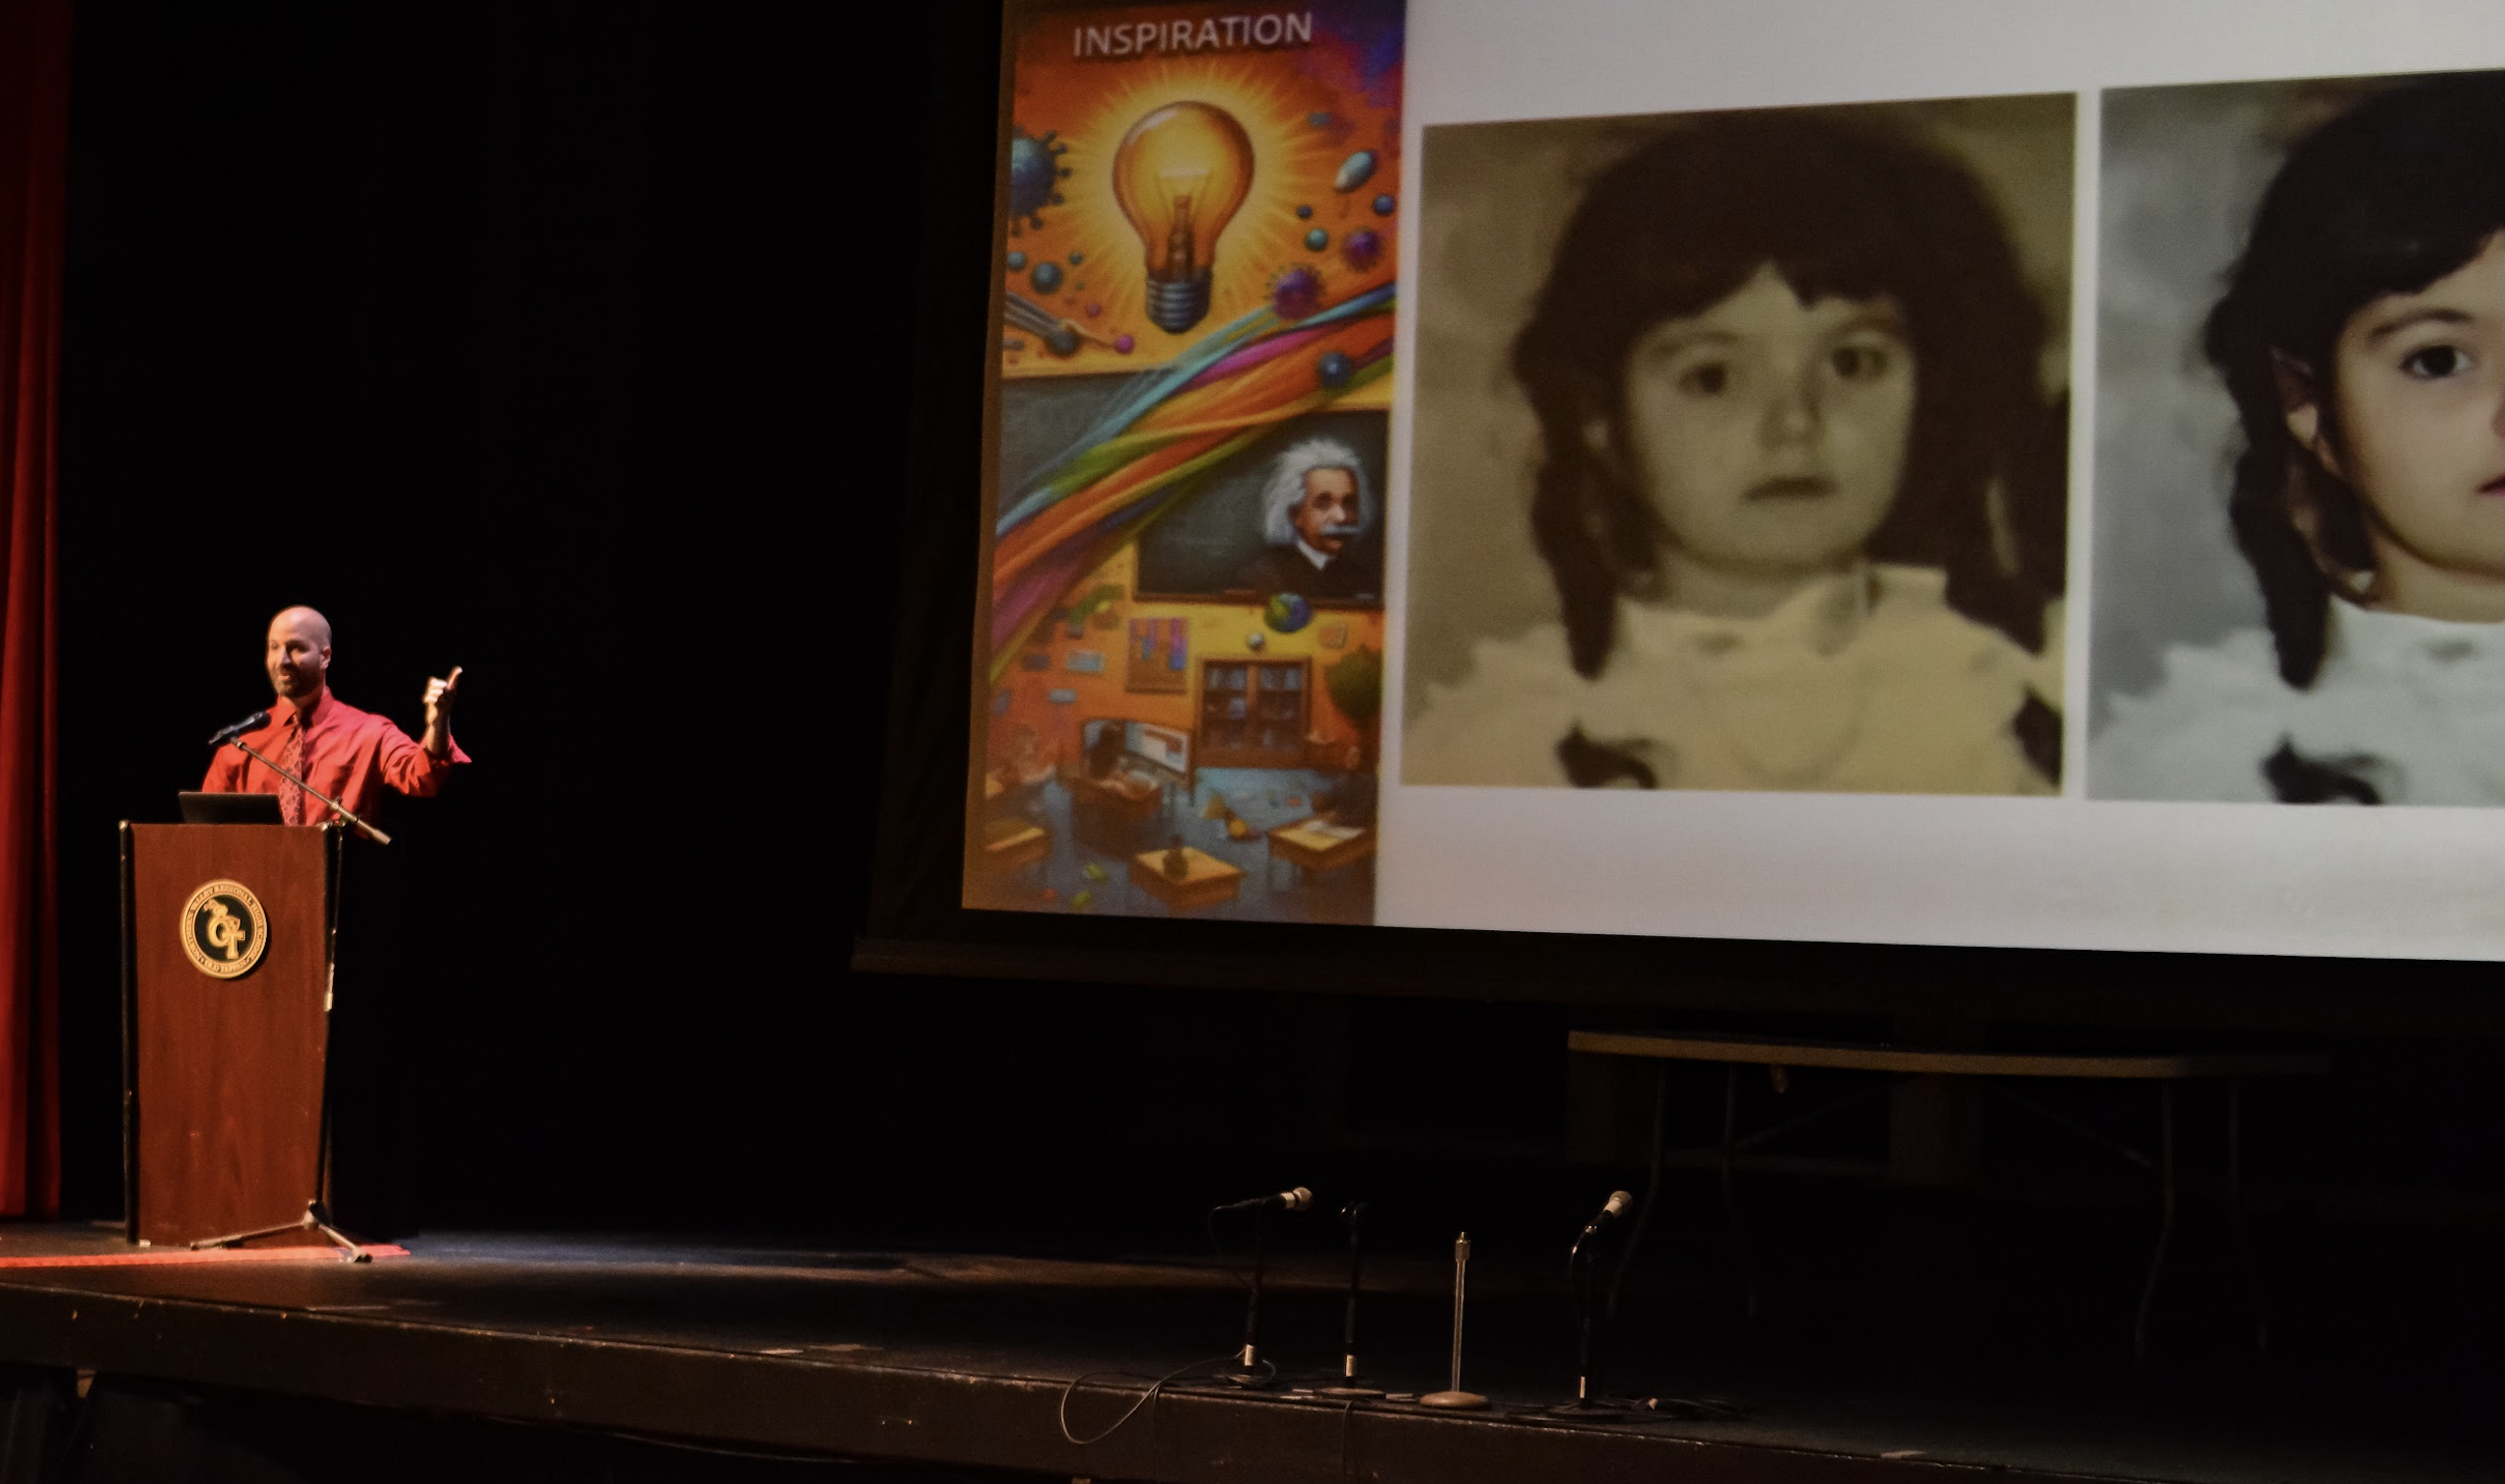 Marc on stage, pointing to the projector screen showing an old photograph, presenting at the New Jersey AI Literacy Summit.